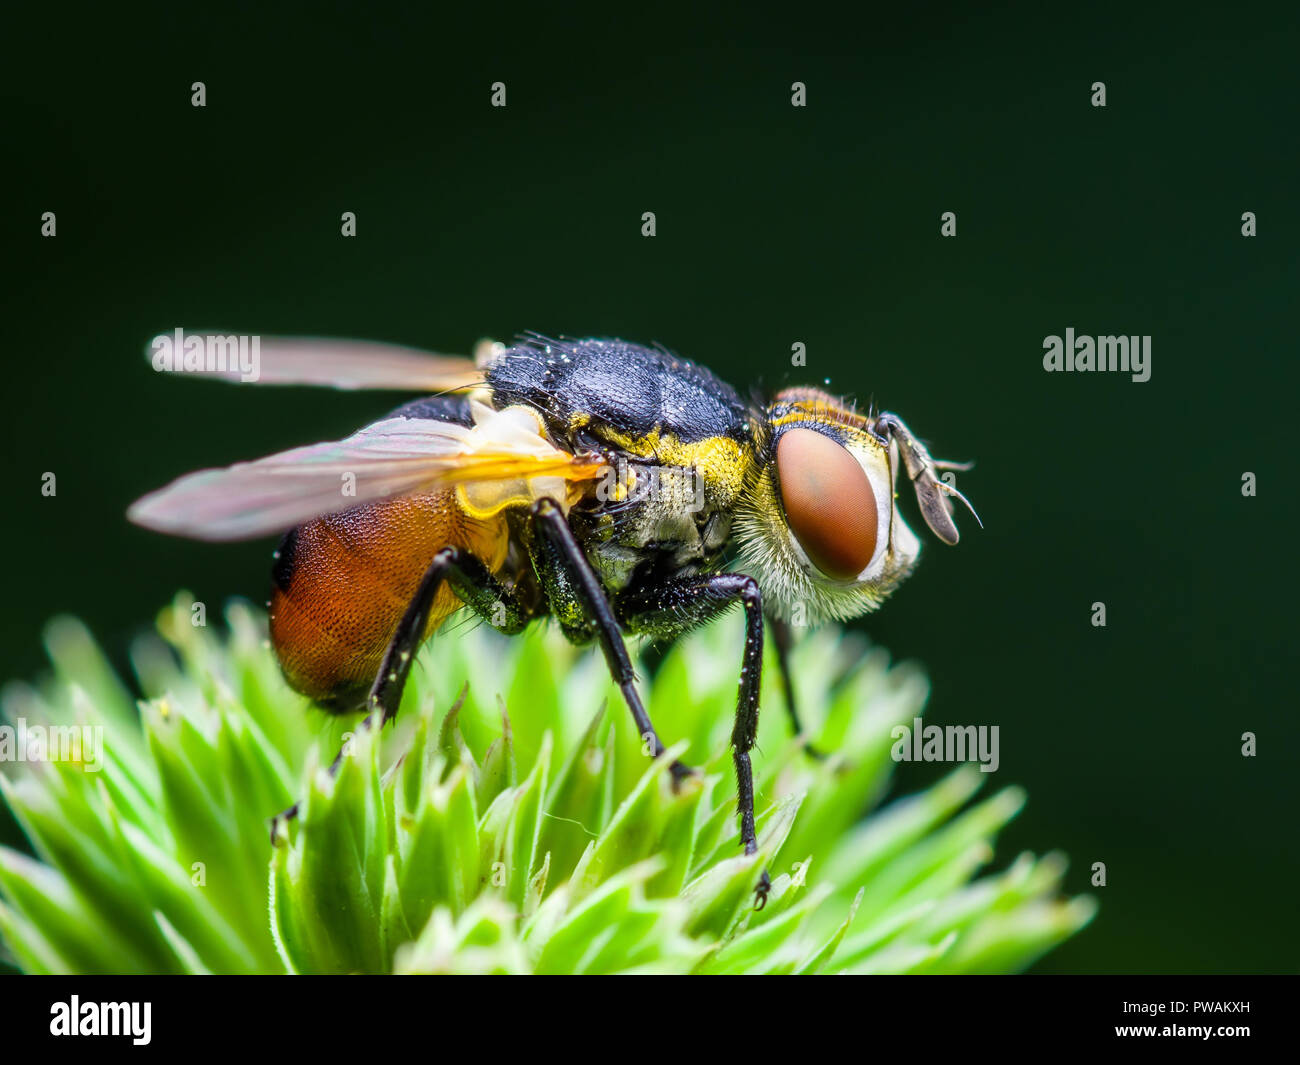 Exotic Drosophila Fruit Fly Diptera Insect on Green Flower Stock Photo